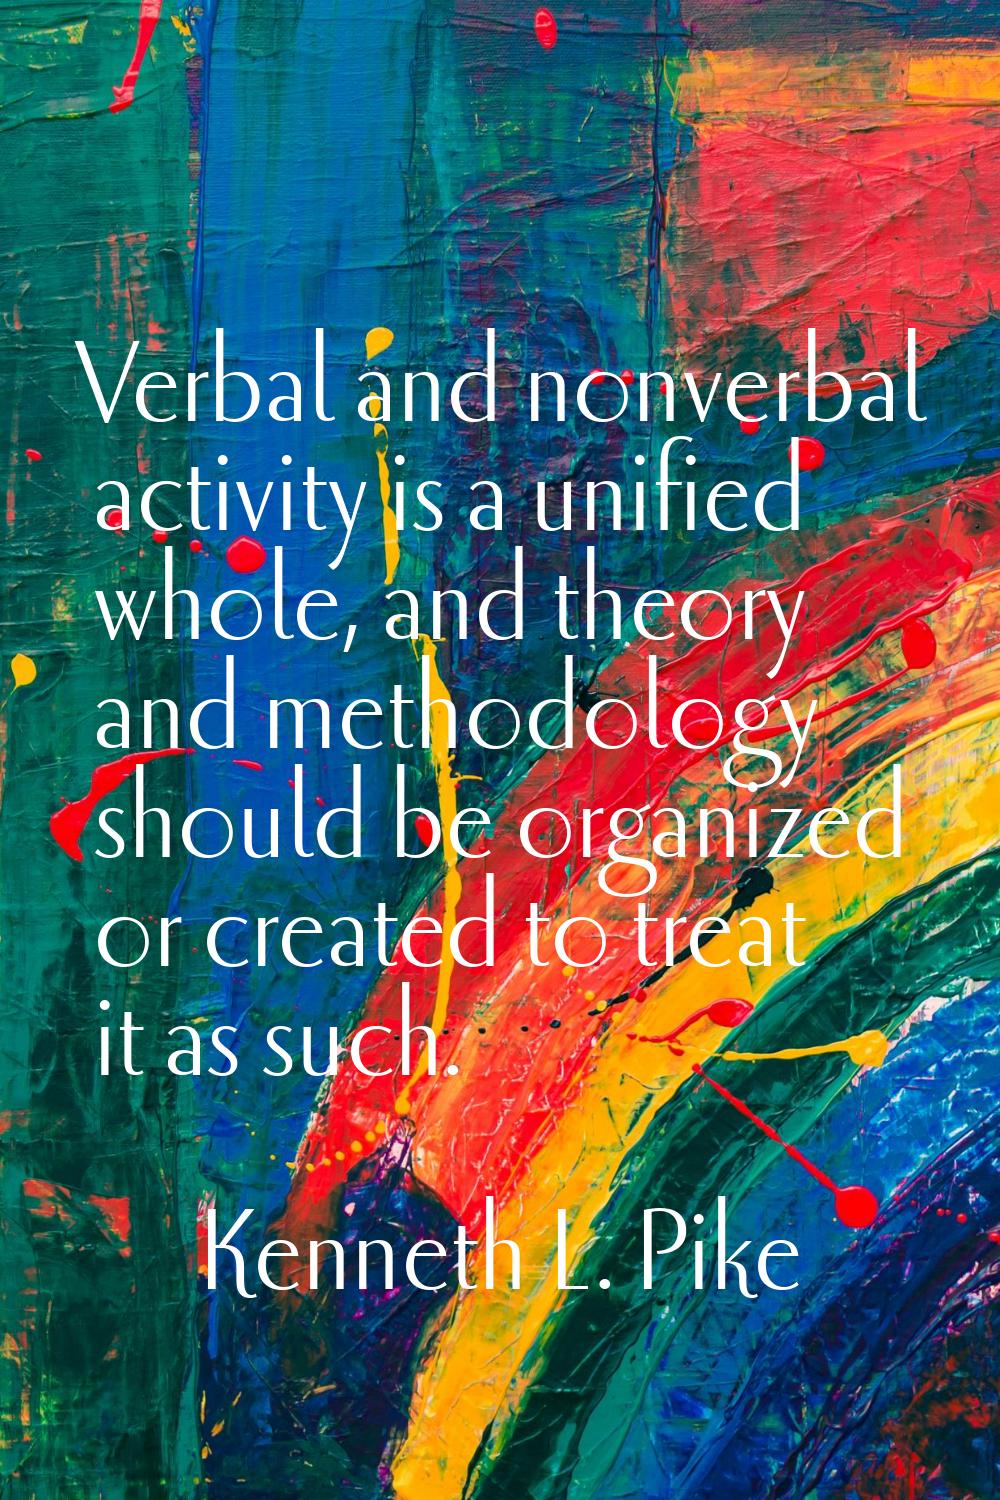 Verbal and nonverbal activity is a unified whole, and theory and methodology should be organized or